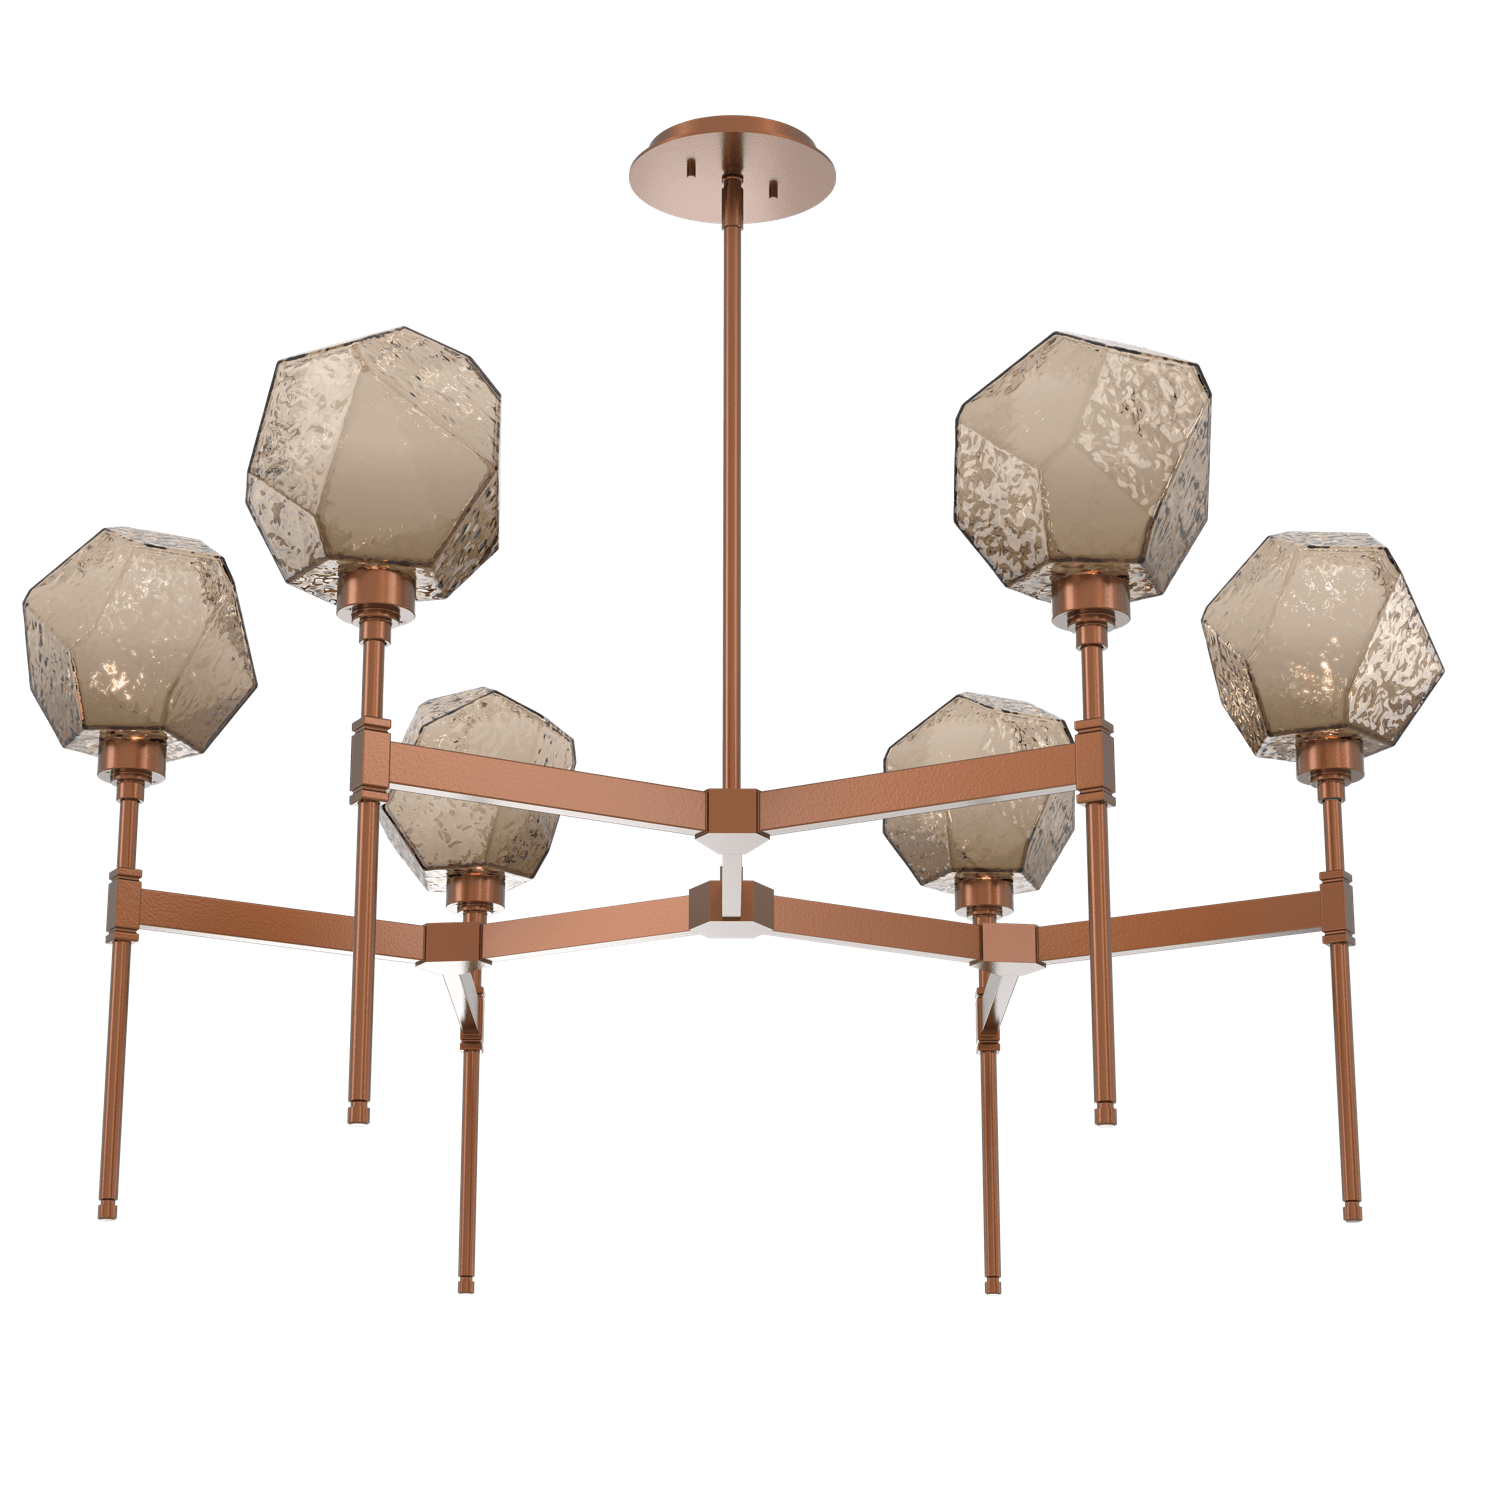 CHB0039-39-BB-B-Hammerton-Studio-Gem-round-belvedere-chandelier-with-burnished-bronze-finish-and-bronze-blown-glass-shades-and-LED-lamping